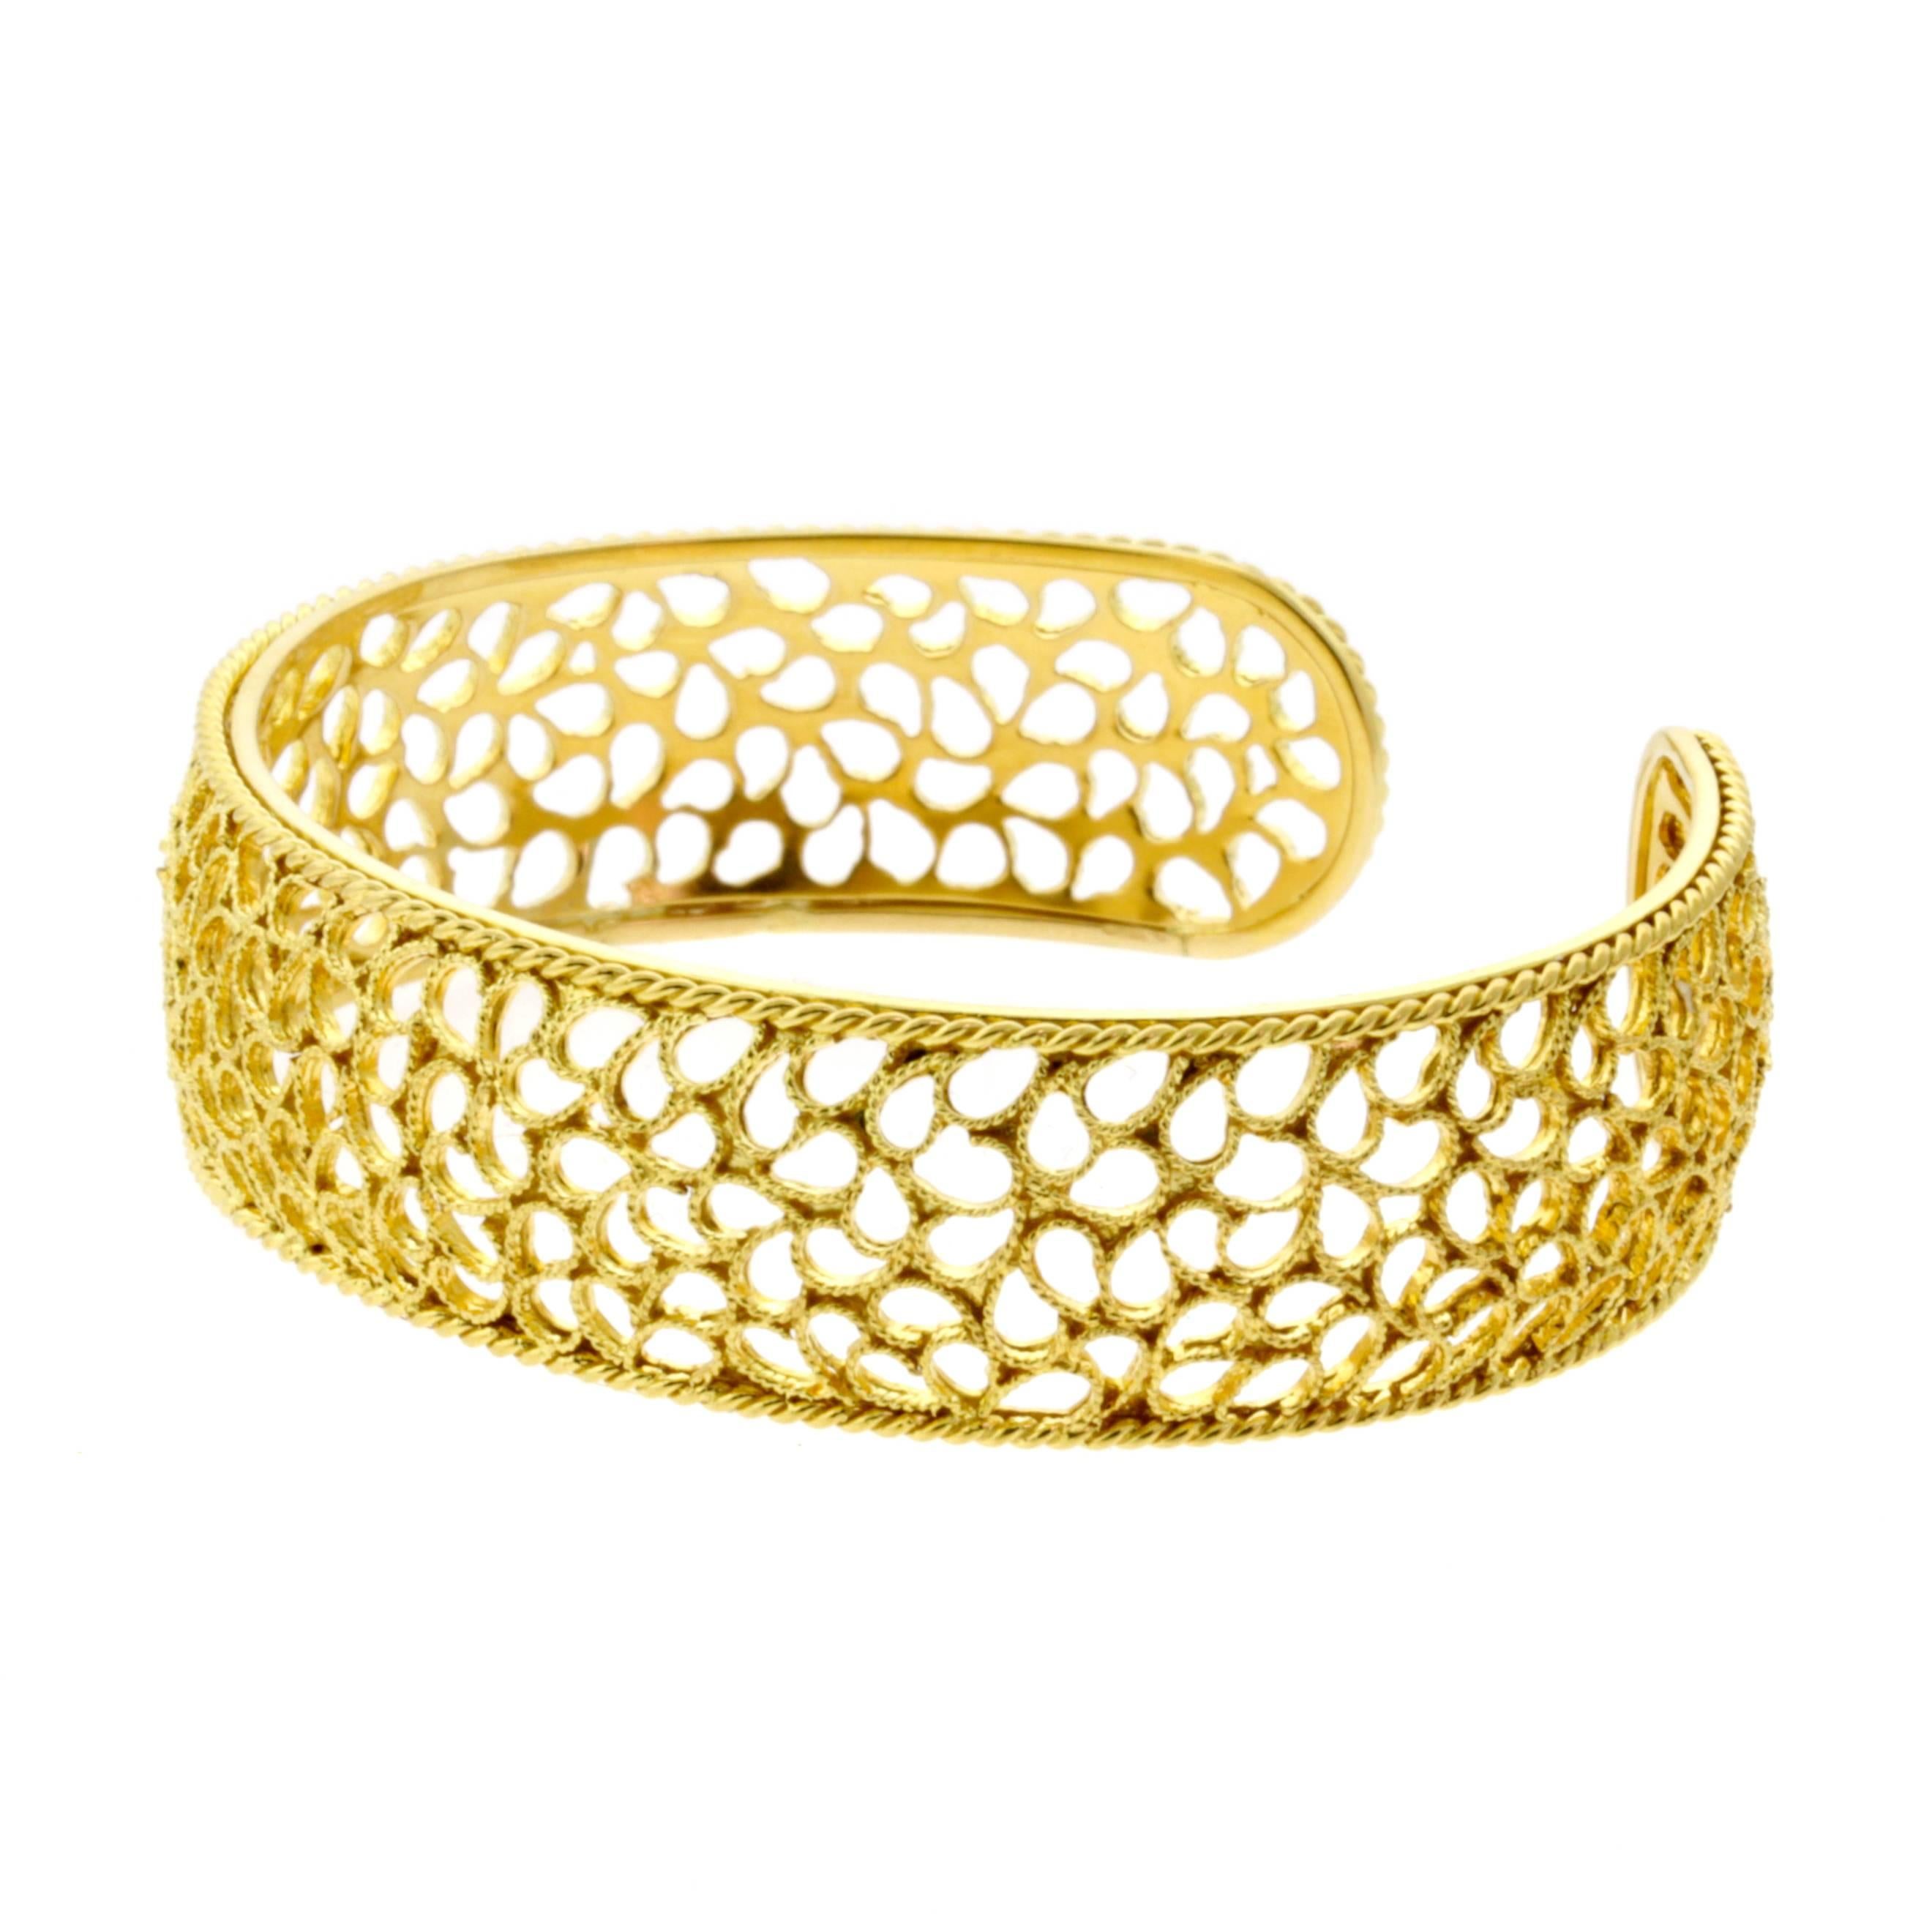 A fabulous Buccellati Cuff bracelet from the Filidoro collection consisting of 18k yellow gold.